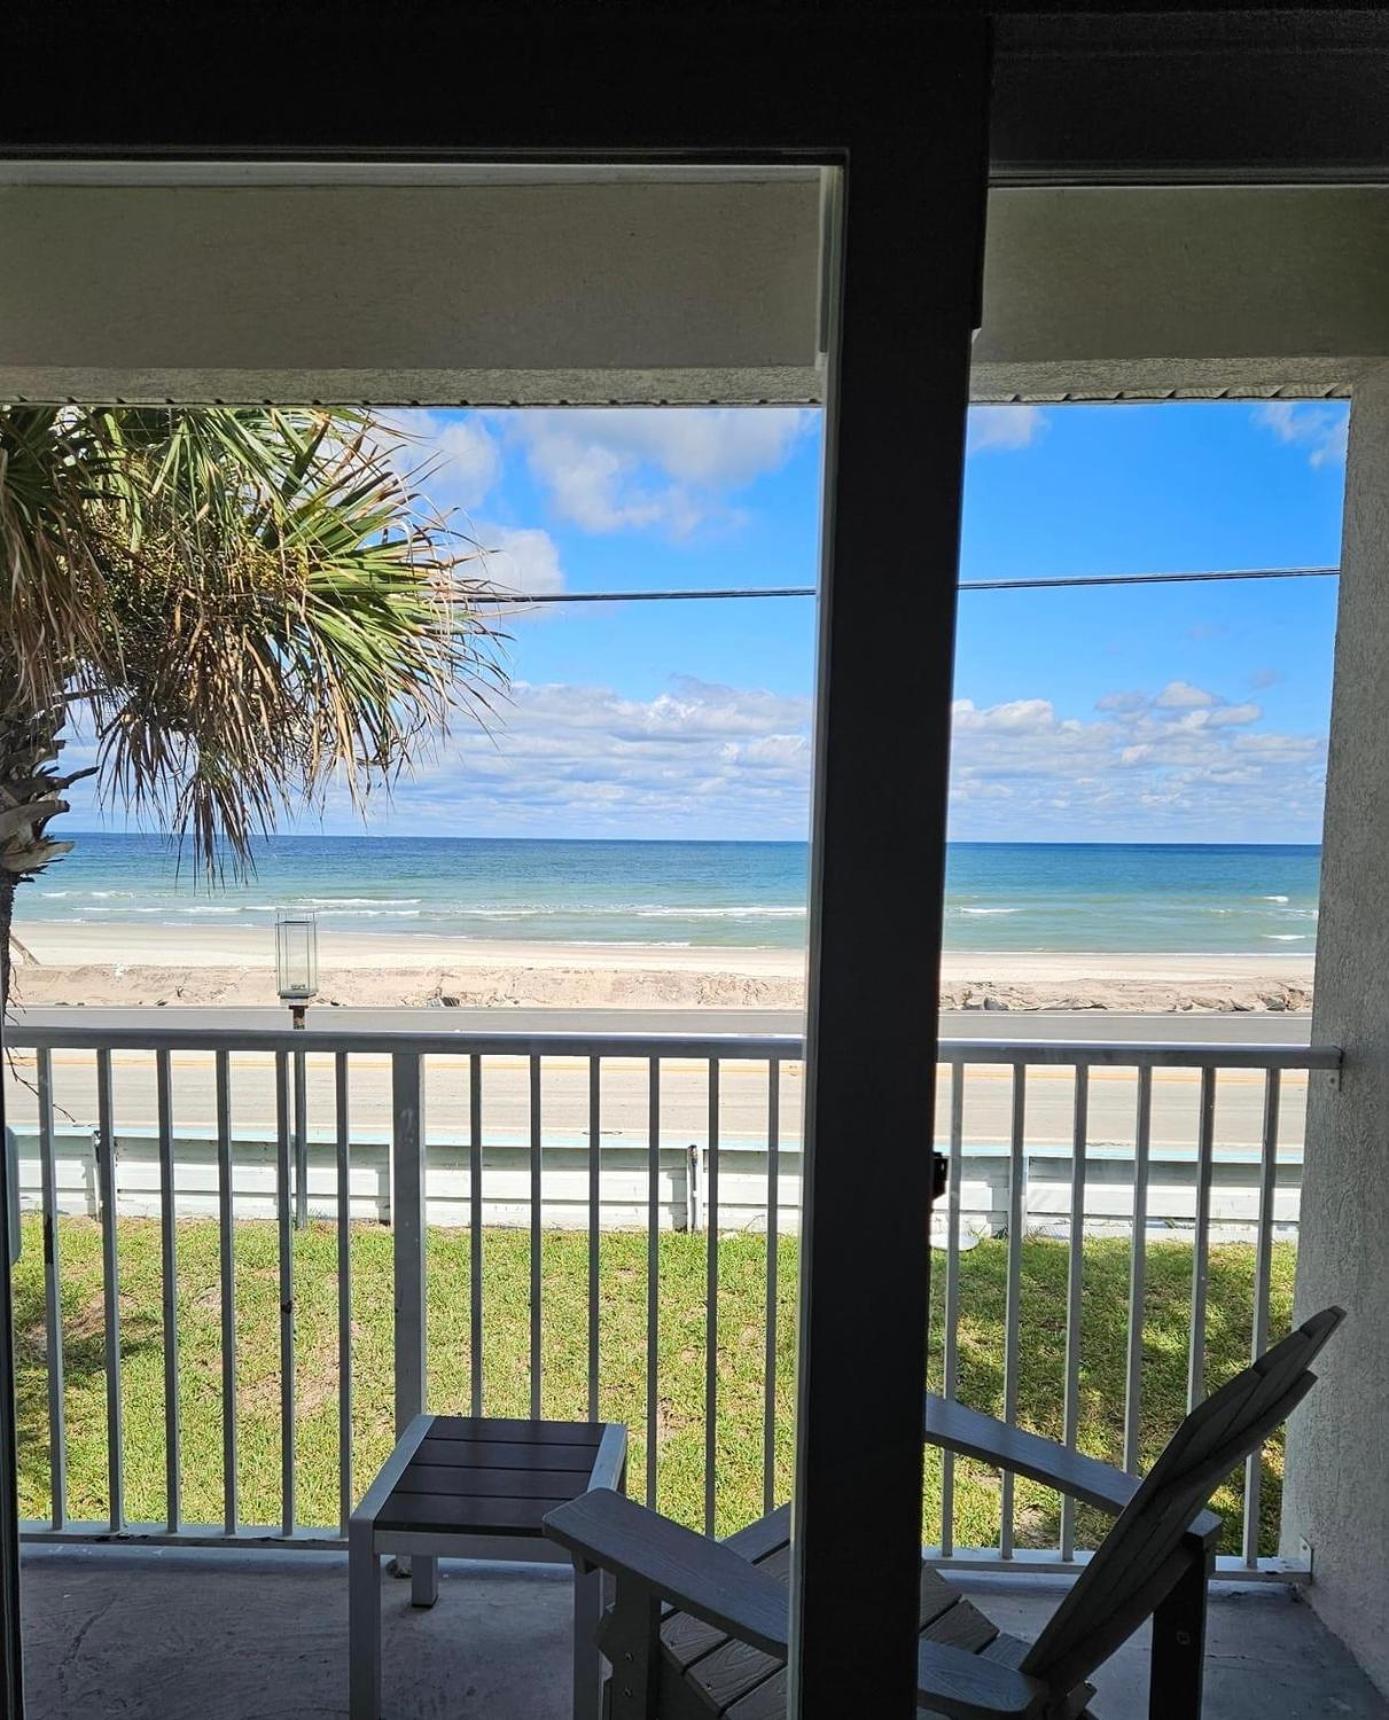 Ocean Sands Beach Boutique Inn-1 Acre Private Beach-St Augustine Historic-2 Miles-Shuttle With Downtown Tour-Heated Salt Water Pool Until 4Am-Popcorn-Cookies-New 4K Usd Black Beds-35 Item Breakfast-Eggs-Bacon-Starbucks-Free Guest Laundry-Ph#904-799-S St. Augustine Exterior foto